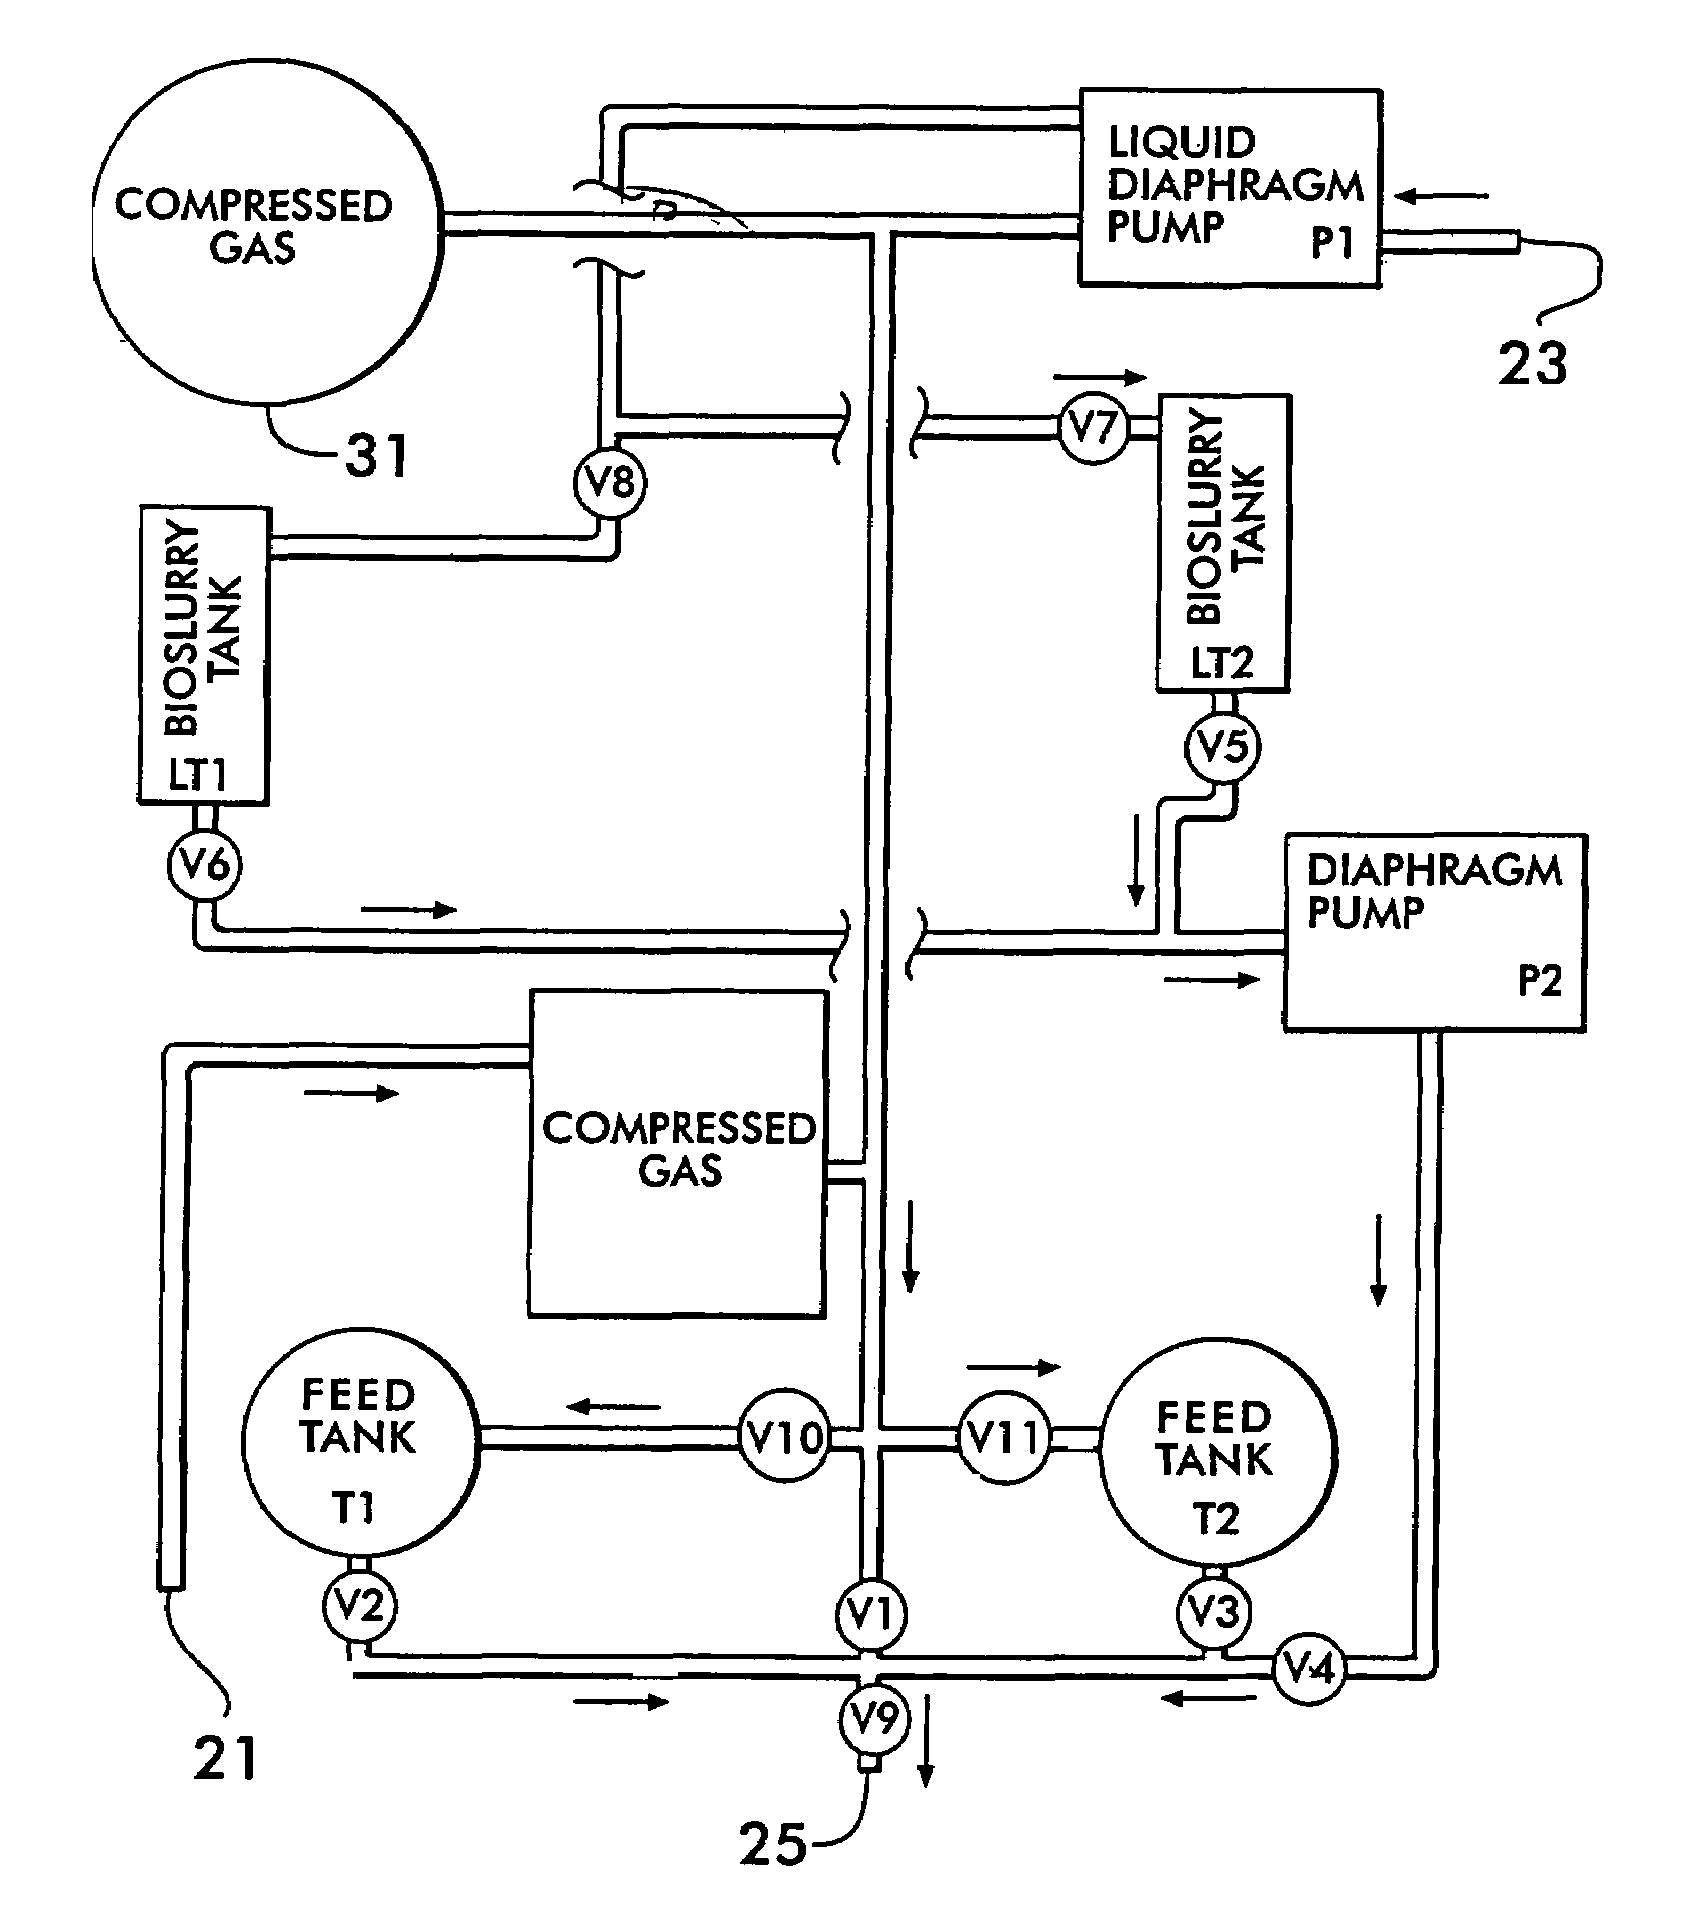 Method for accelerated dechlorination of matter